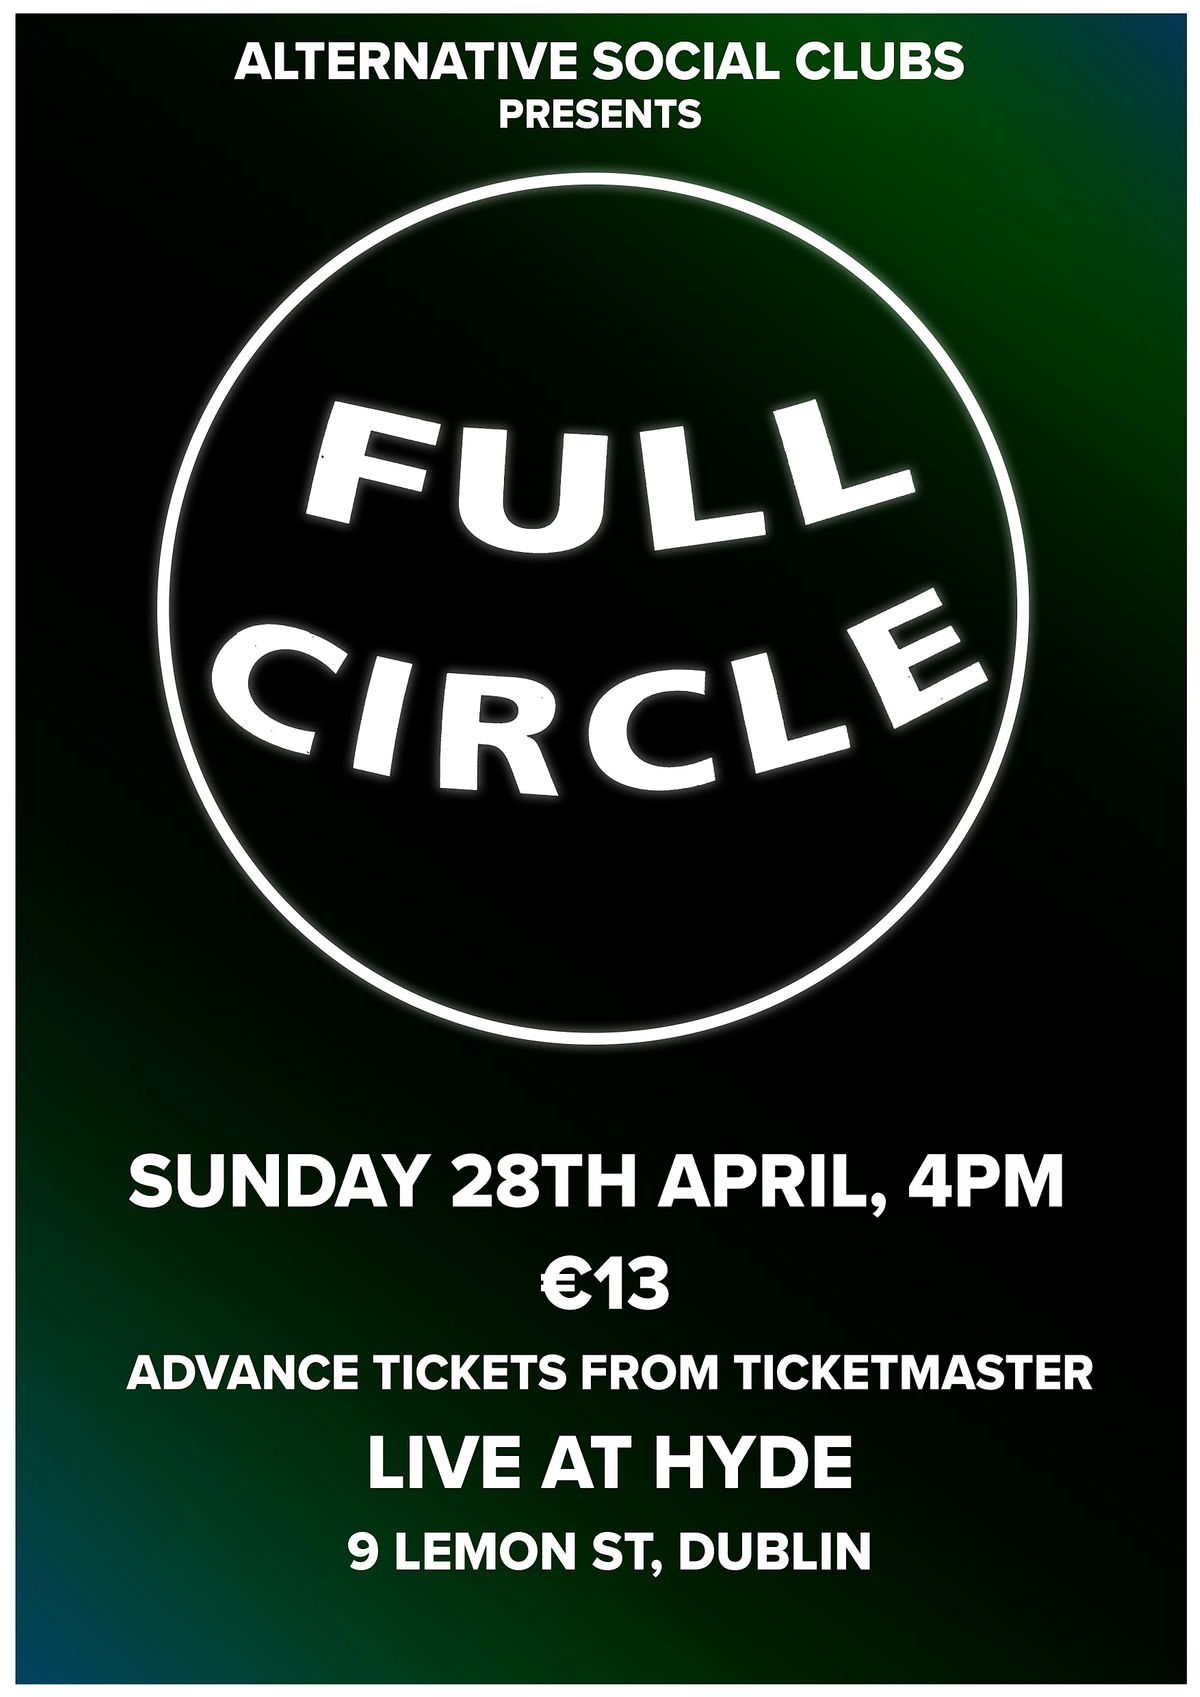 Full Circle return to Hyde to play the Alternative Sunday Social Club